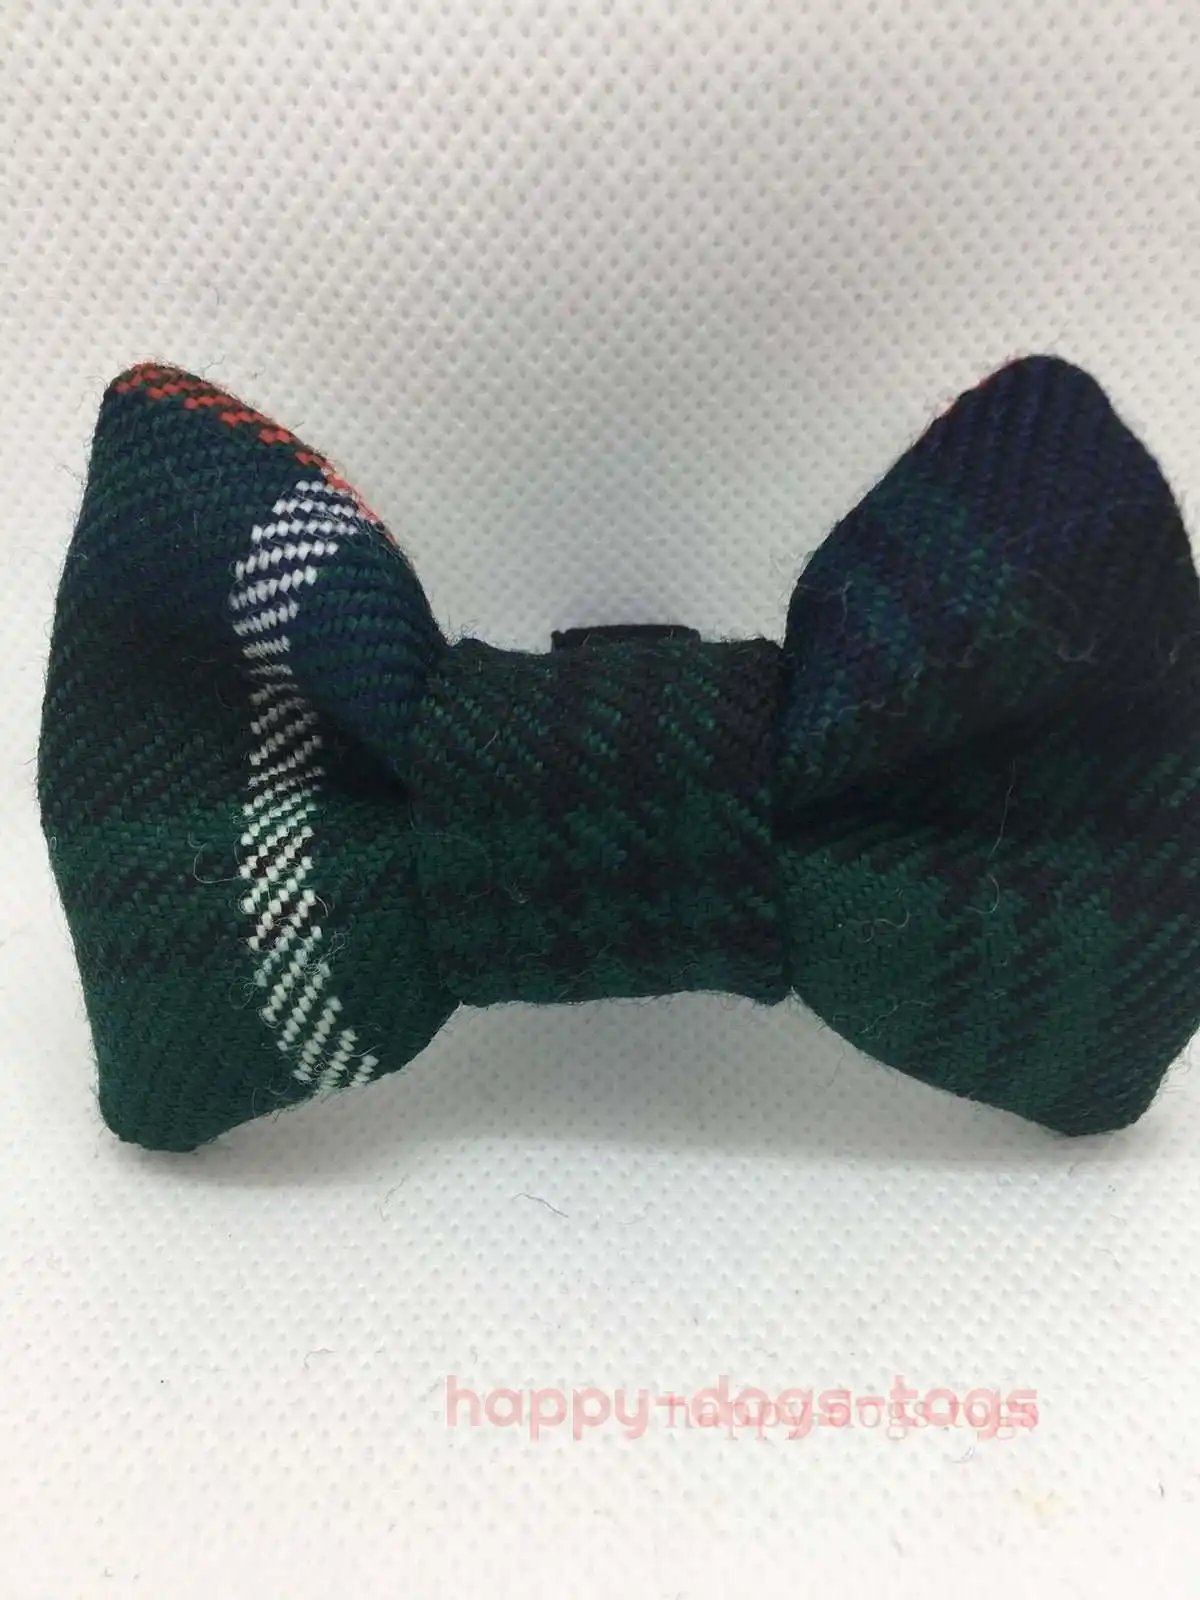 Small Green ,White and Black Tartan bow tie for your dog.